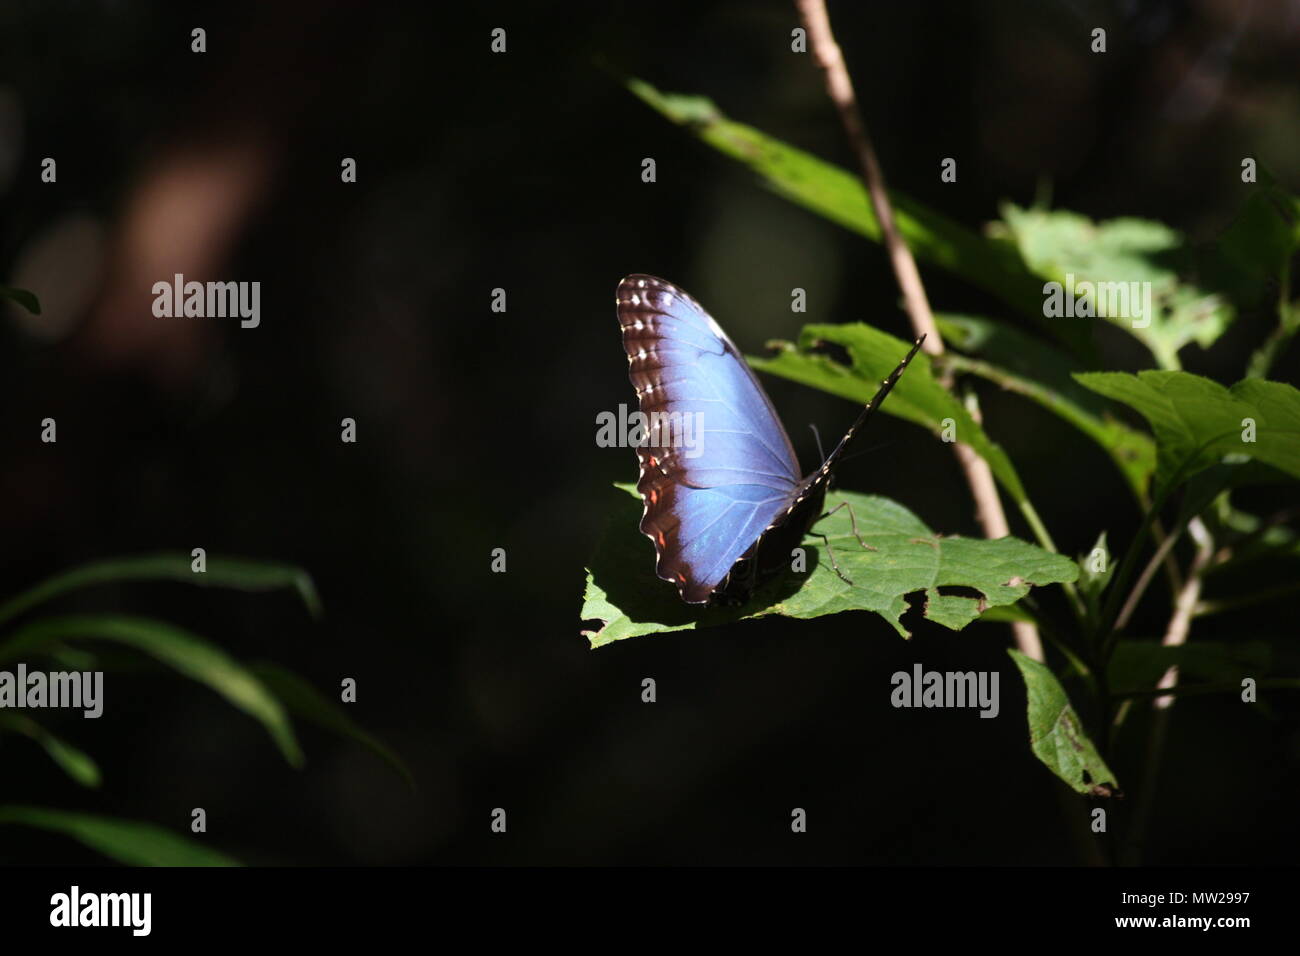 Black and blue butterfly sitting on green leaf Stock Photo